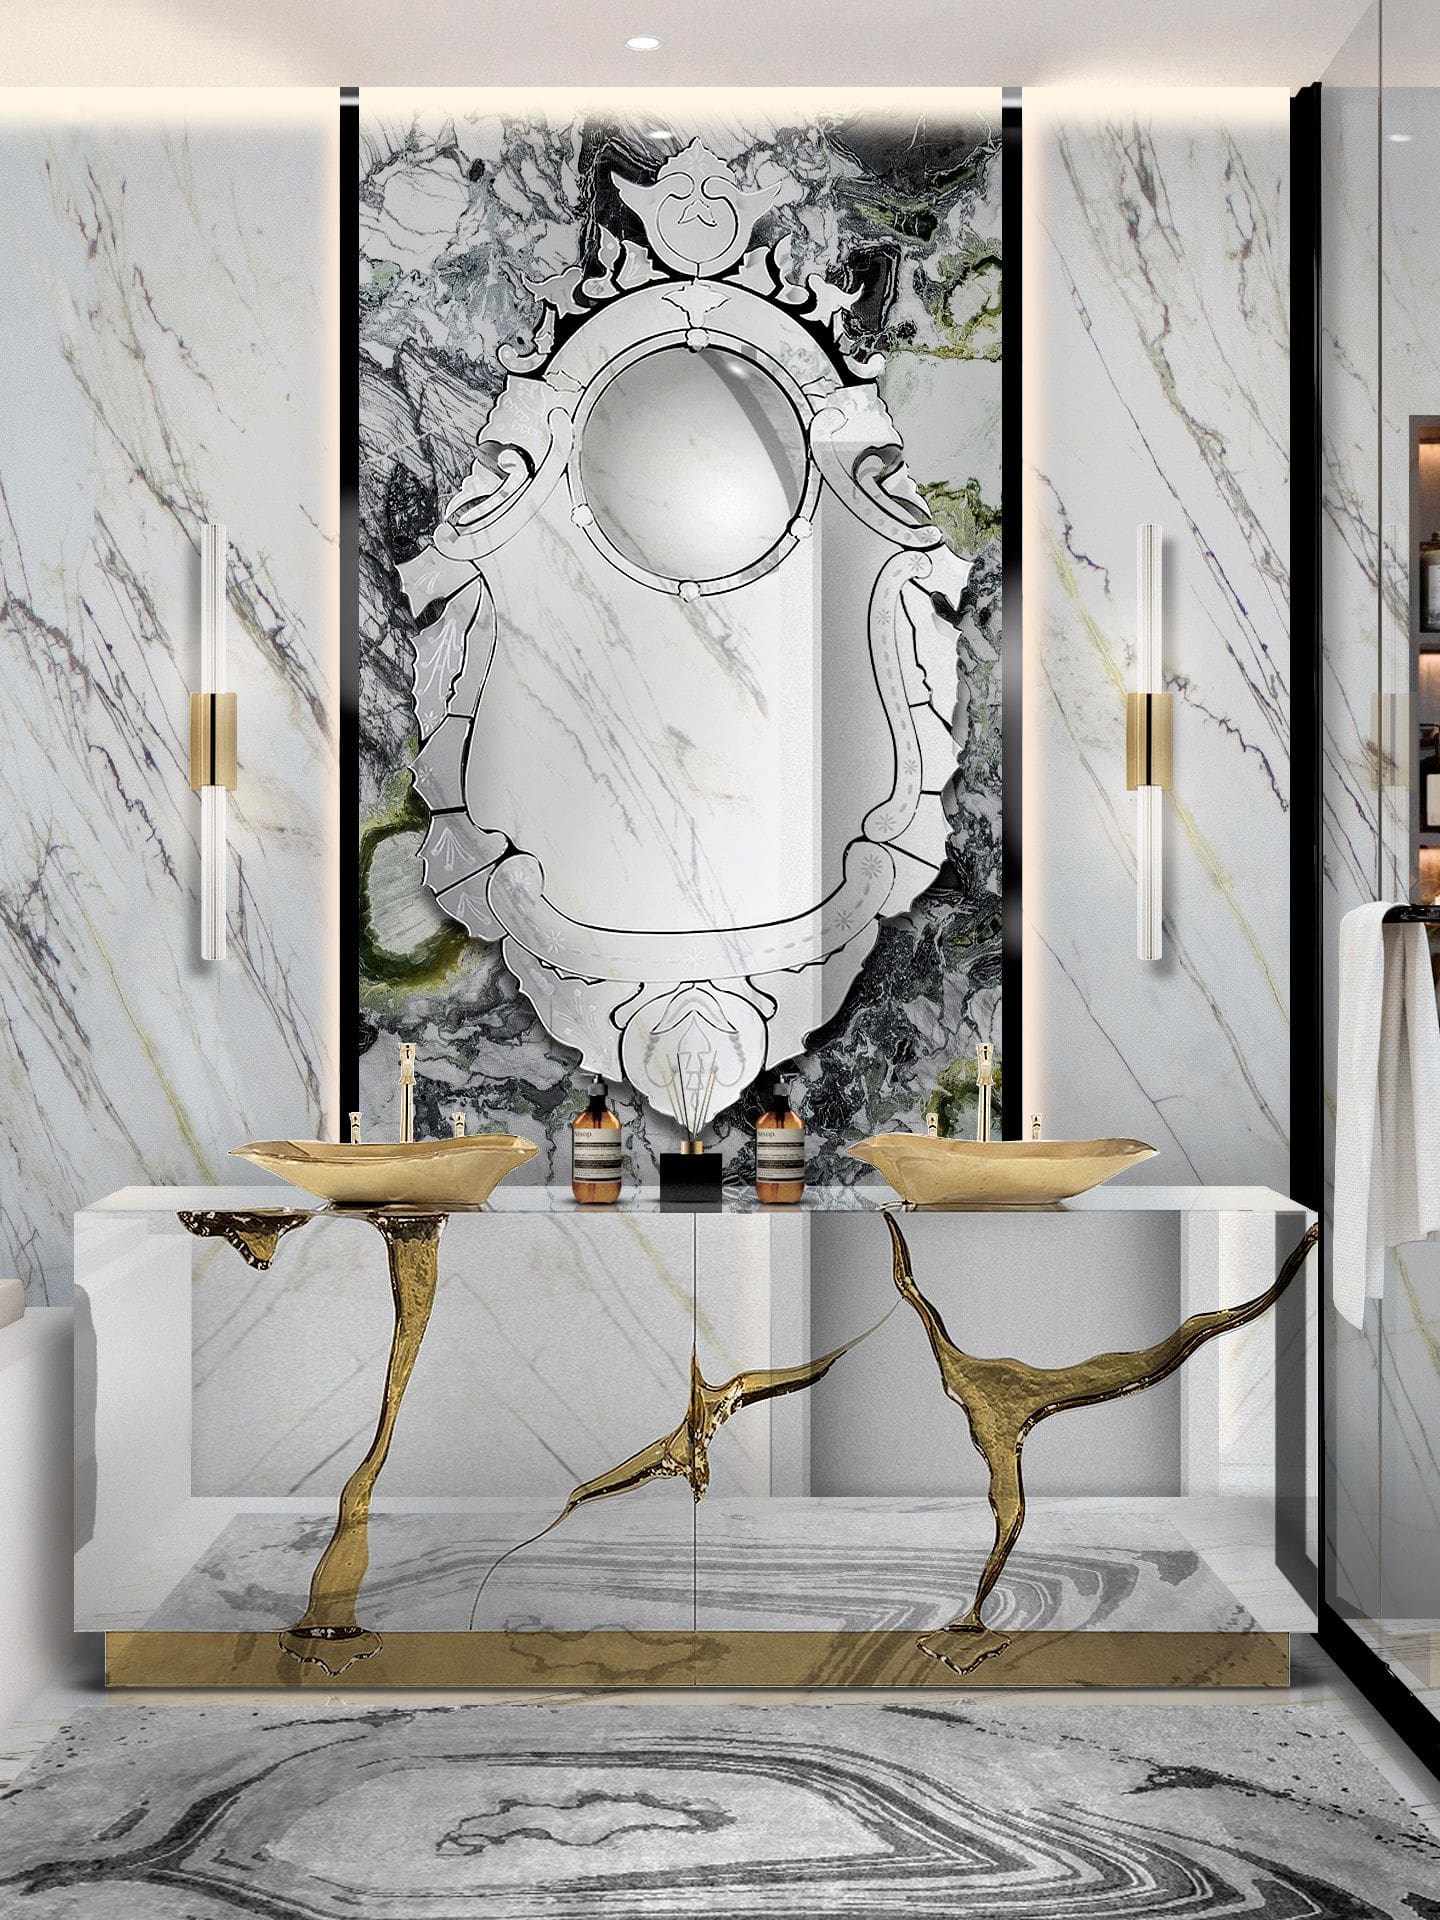 Bathroom Interior Design With Polished Brass - Home'Society